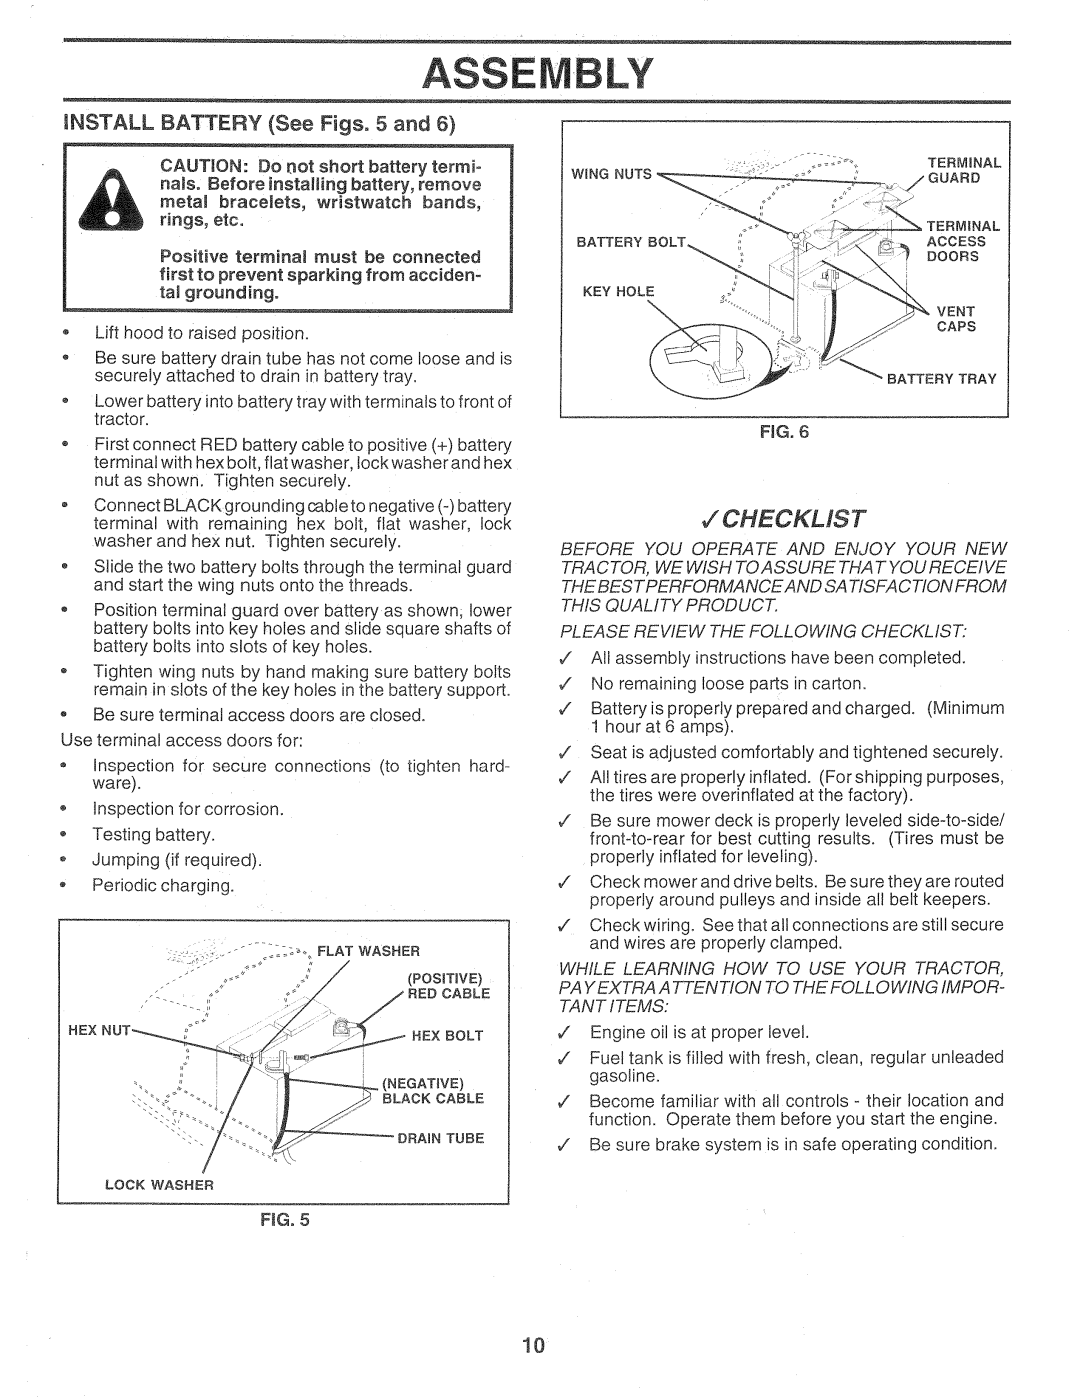 Sears 917.257720 owner manual Assembly, v CHECKMST, INSTALL BATTERY See Figs, 5 and 